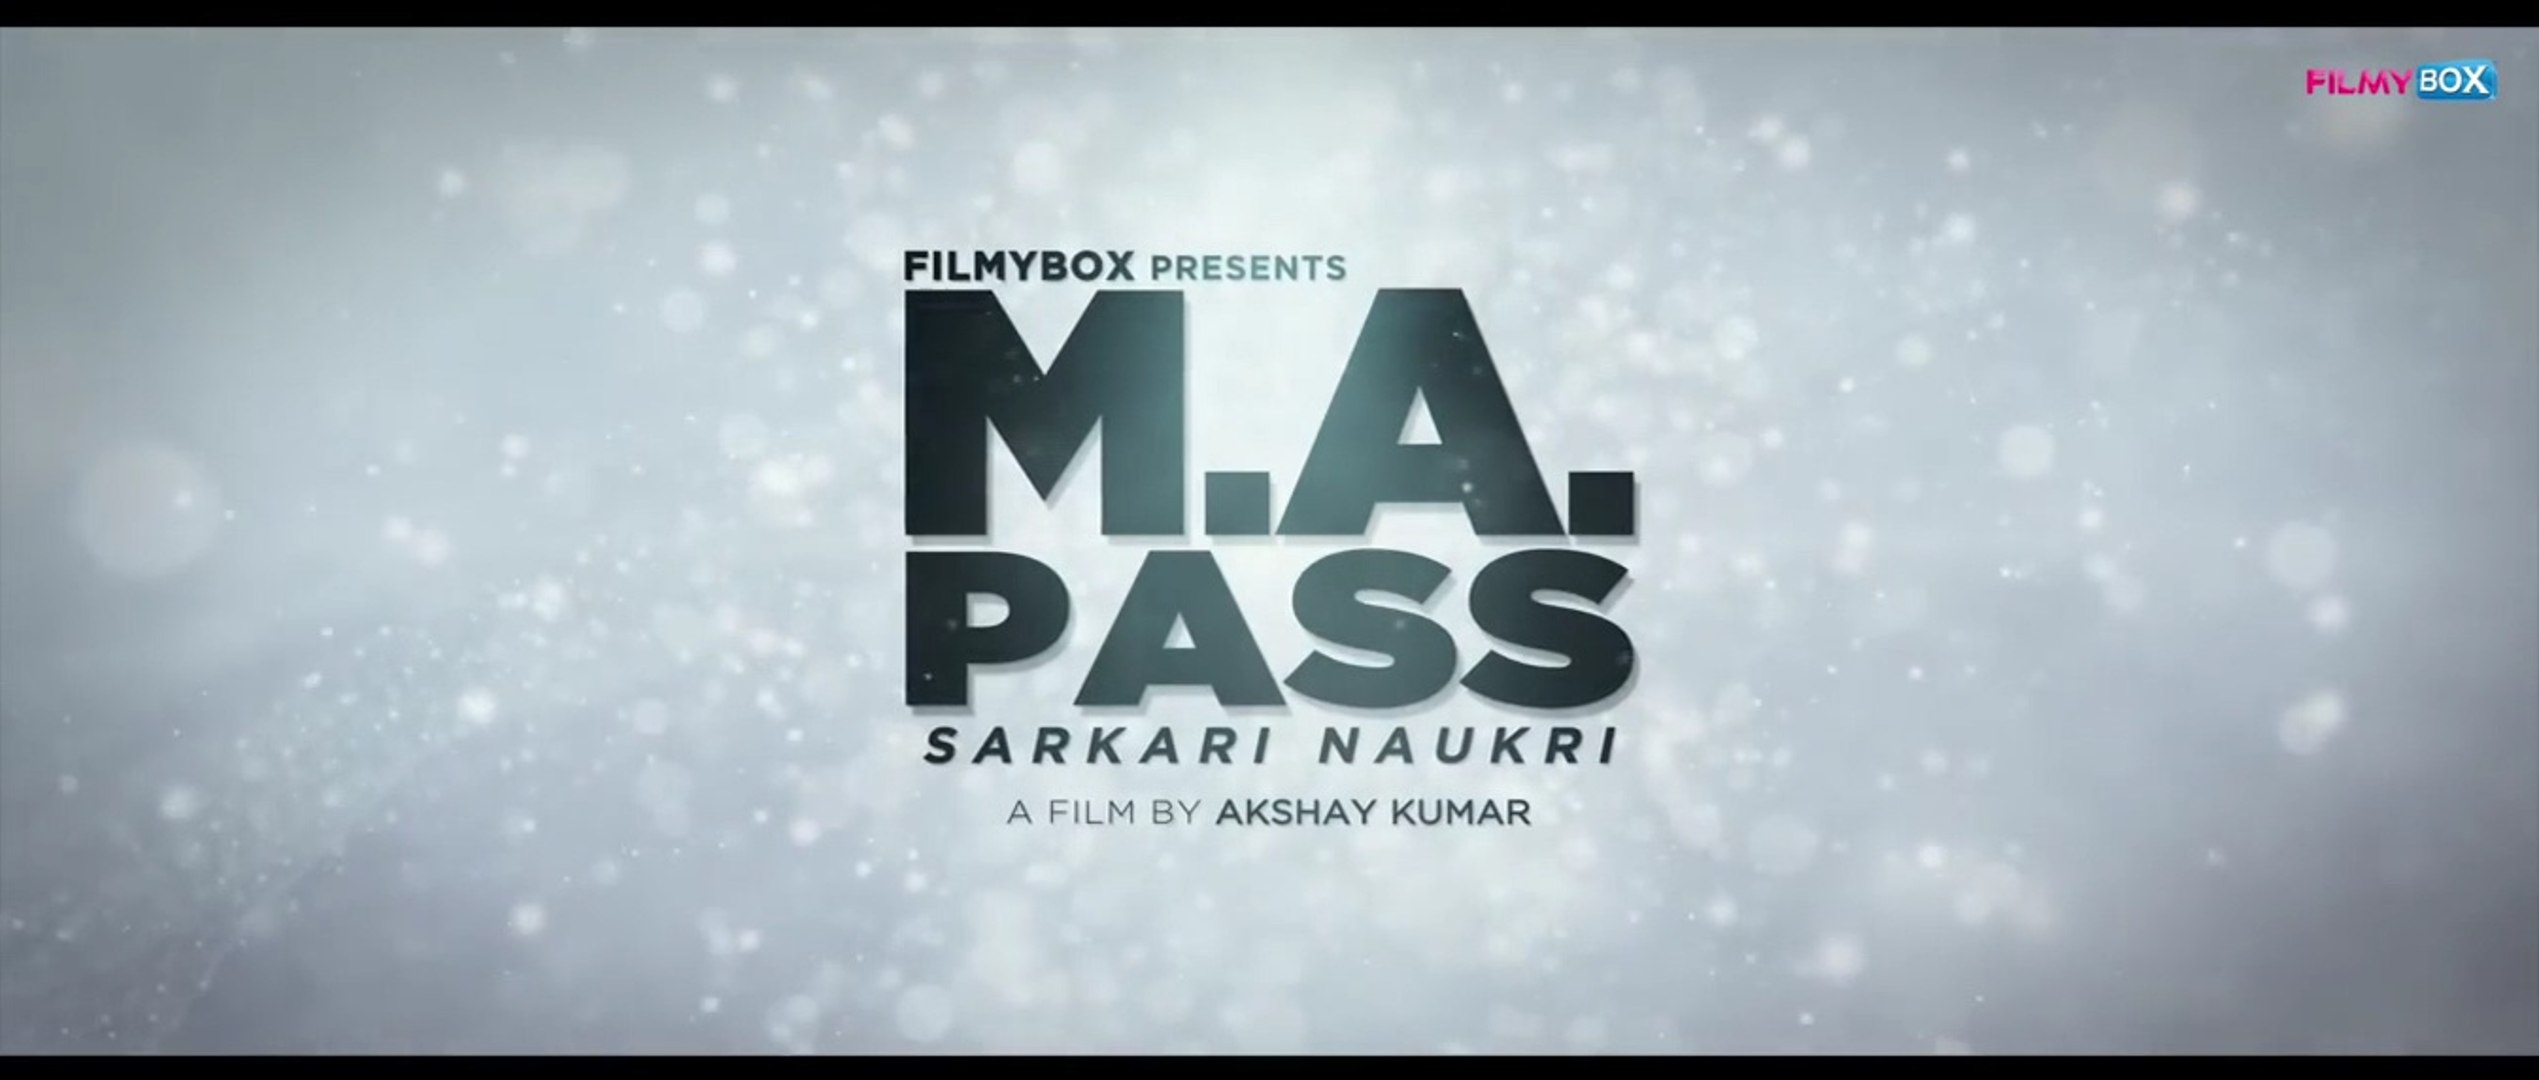 dona rajan recommends ma pass movie online pic